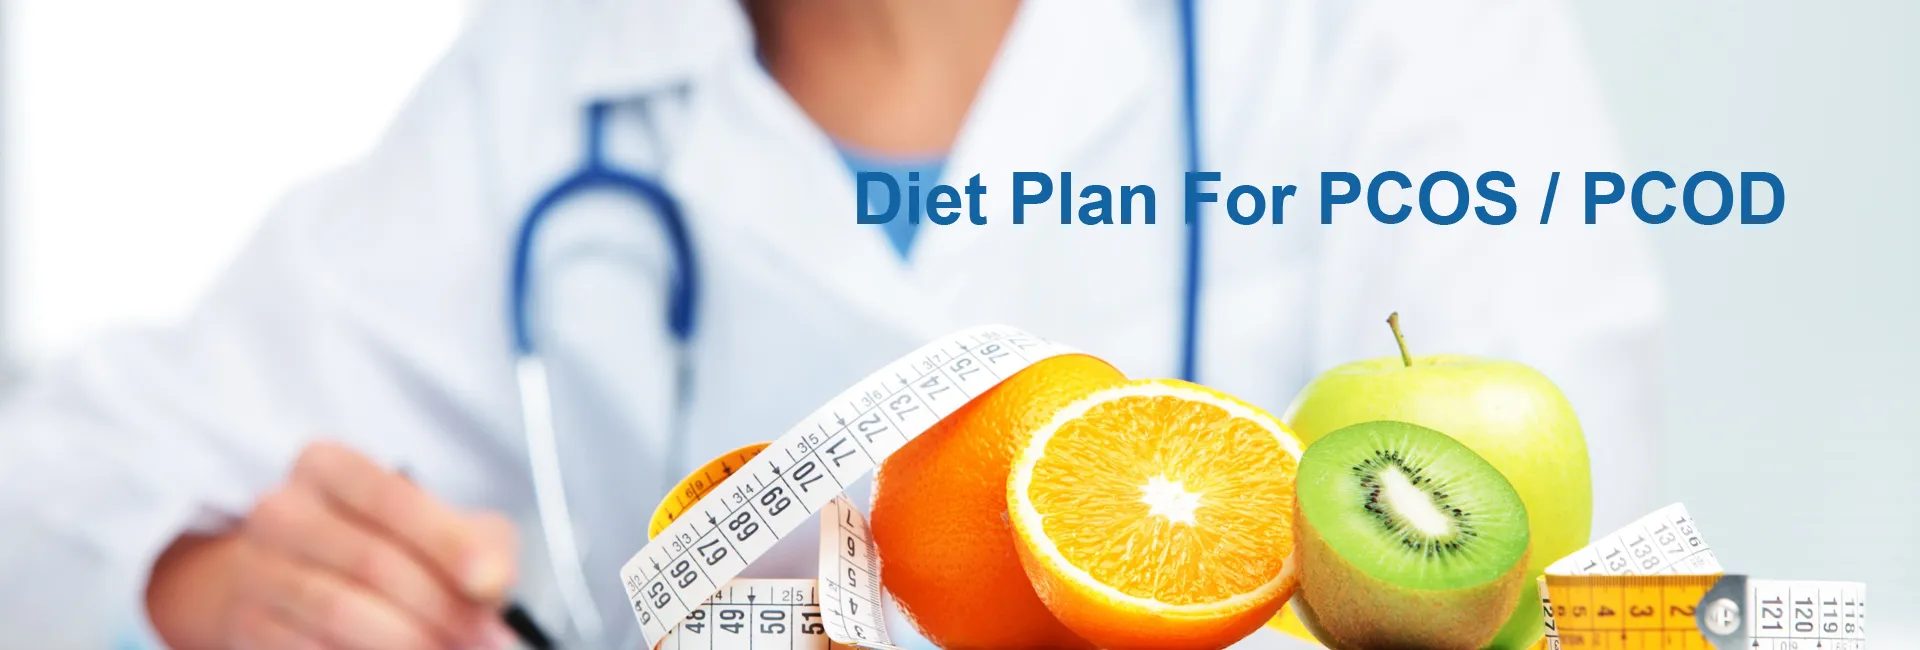 Diet Plan For PCOS / PCOD In Val-d'or